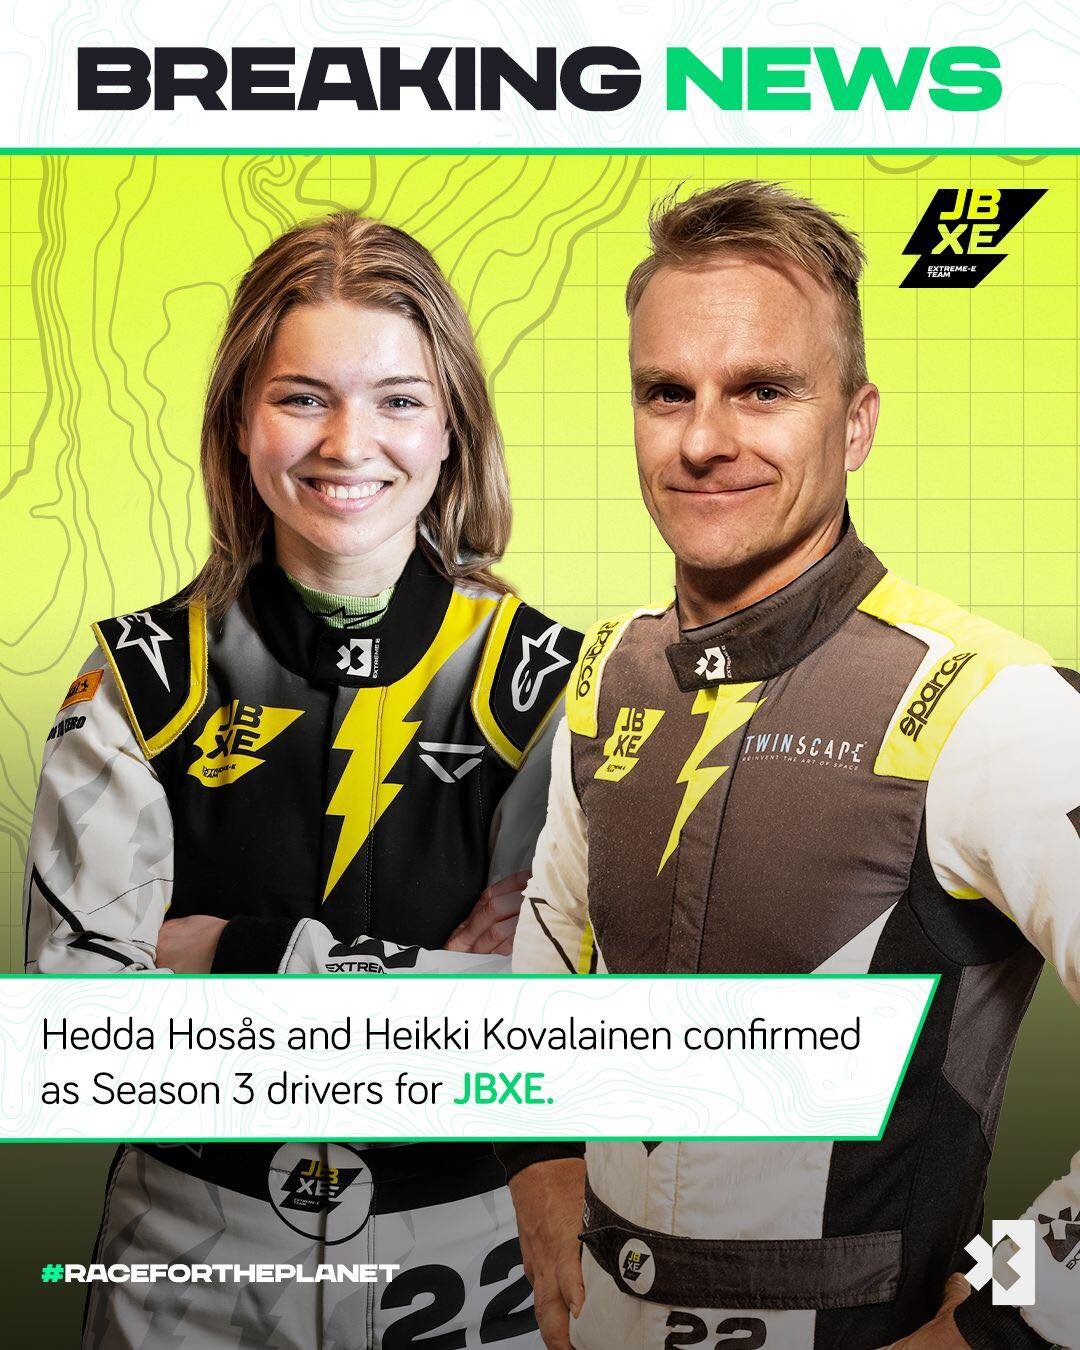 🚨 BREAKING NEWS 🚨

We are super excited to announce that Former F1 star Heikki Kovalainen will join Hedda Hosaas at JBXE Racing for Season 3! 🙌 #ExtremeE #JBXE #LetsGo! 

@jensonbutton @heddahosaas @heikkikovalainen